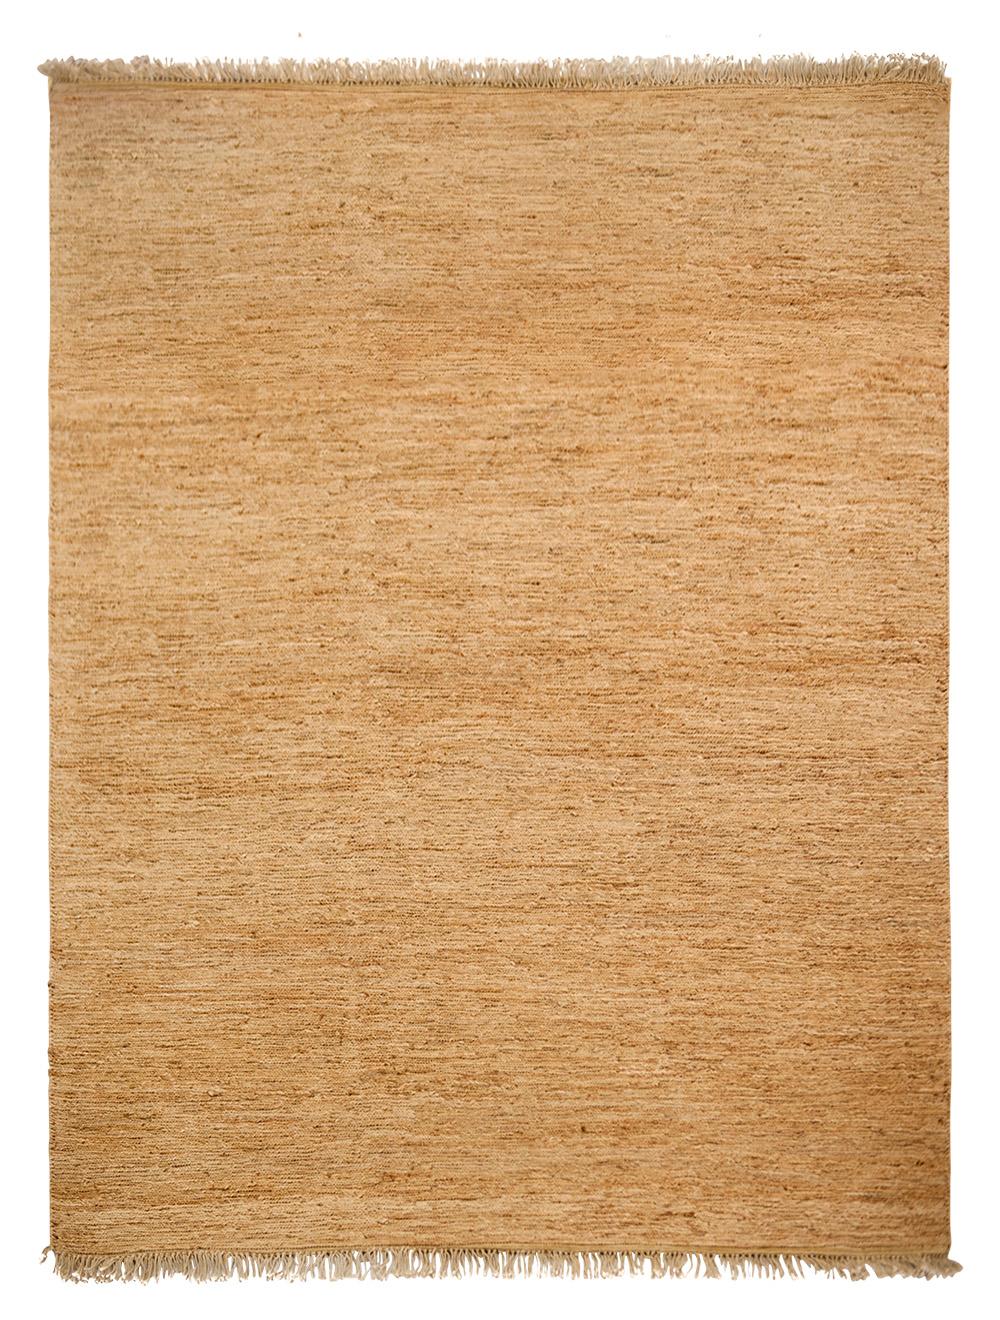 Natural Sumace carpet with fringes by Massimo Copenhagen
Handknotted
Materials: 100% Hemp
Dimensions: W 250 x H 300 cm
Available colors: Natural, Natural with Fringes, Black, Black with Fringes, and Navy.
Other dimensions are available: 170x240